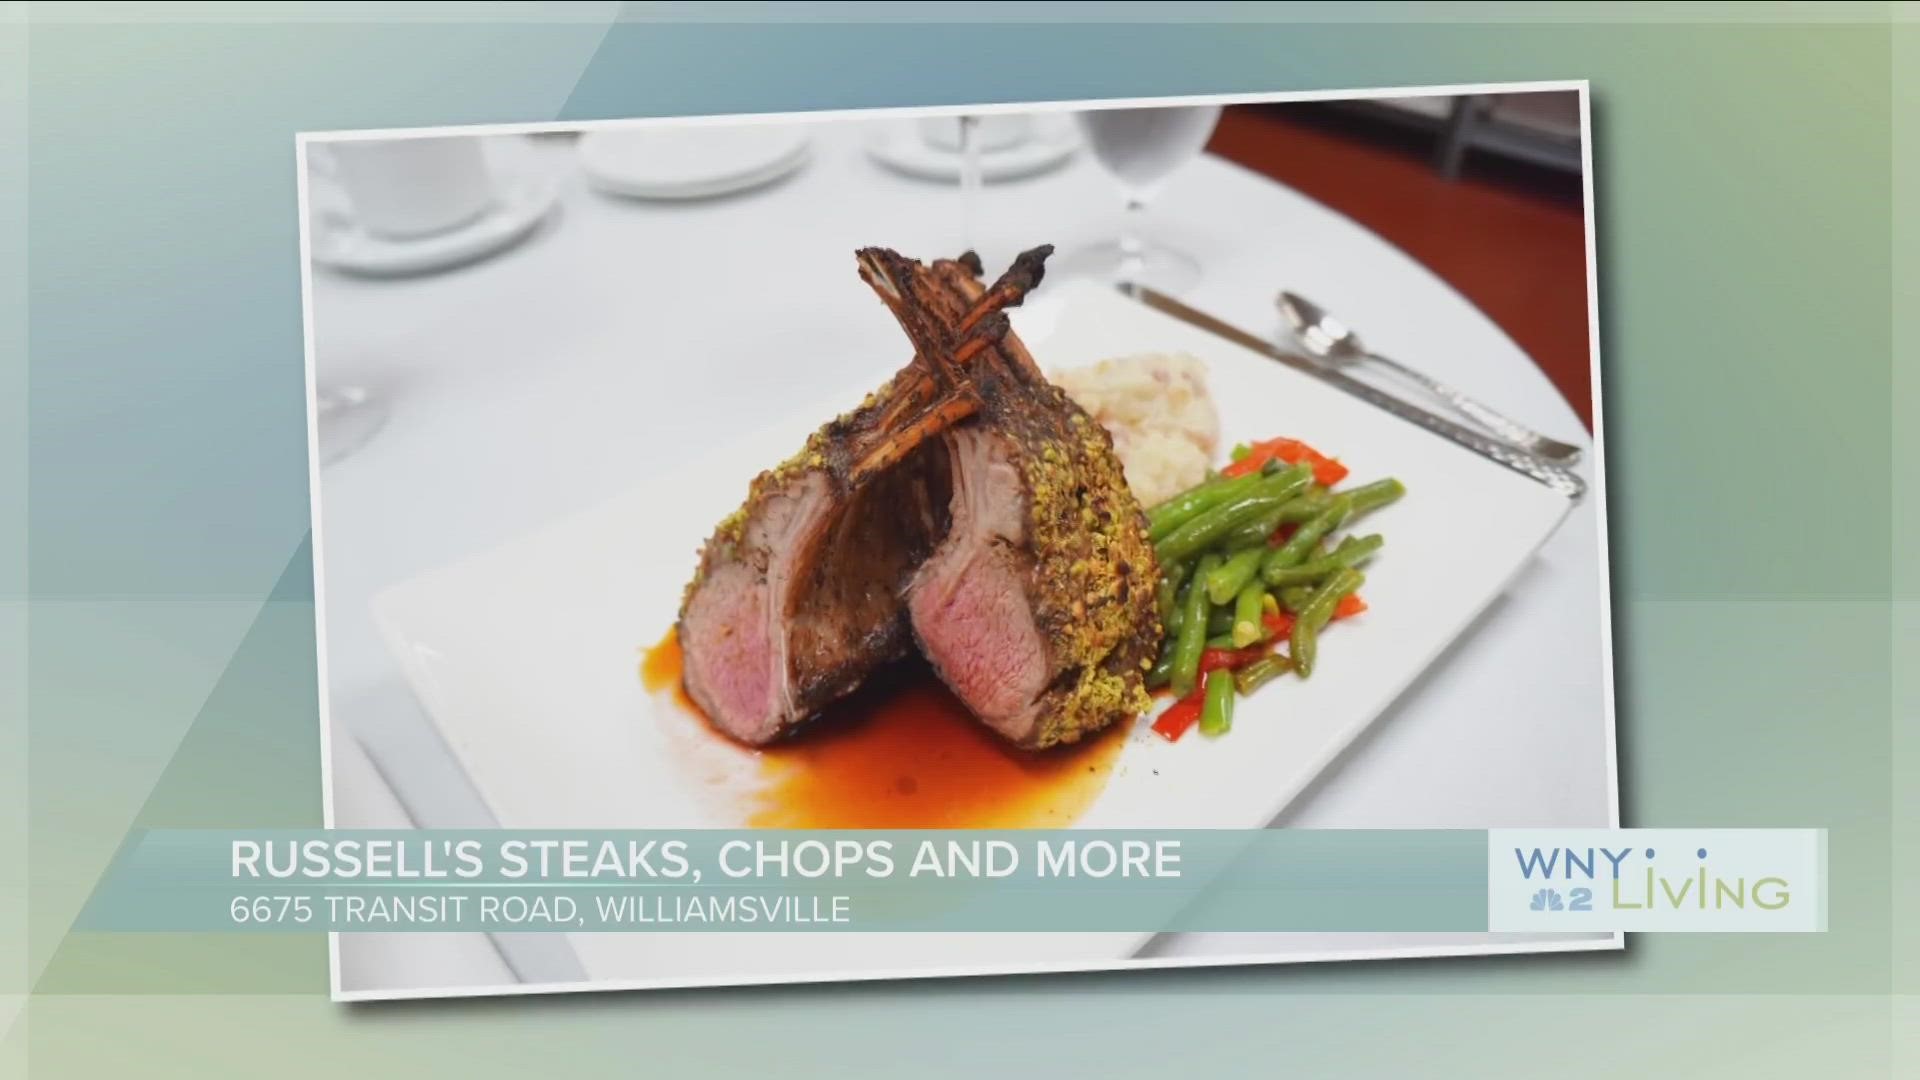 WNY Living - February 25th - Russell's Steaks, Chops & More  -THIS VIDEO IS SPONSORED BY RUSSELL'S STEAKS CHOPS & MORE